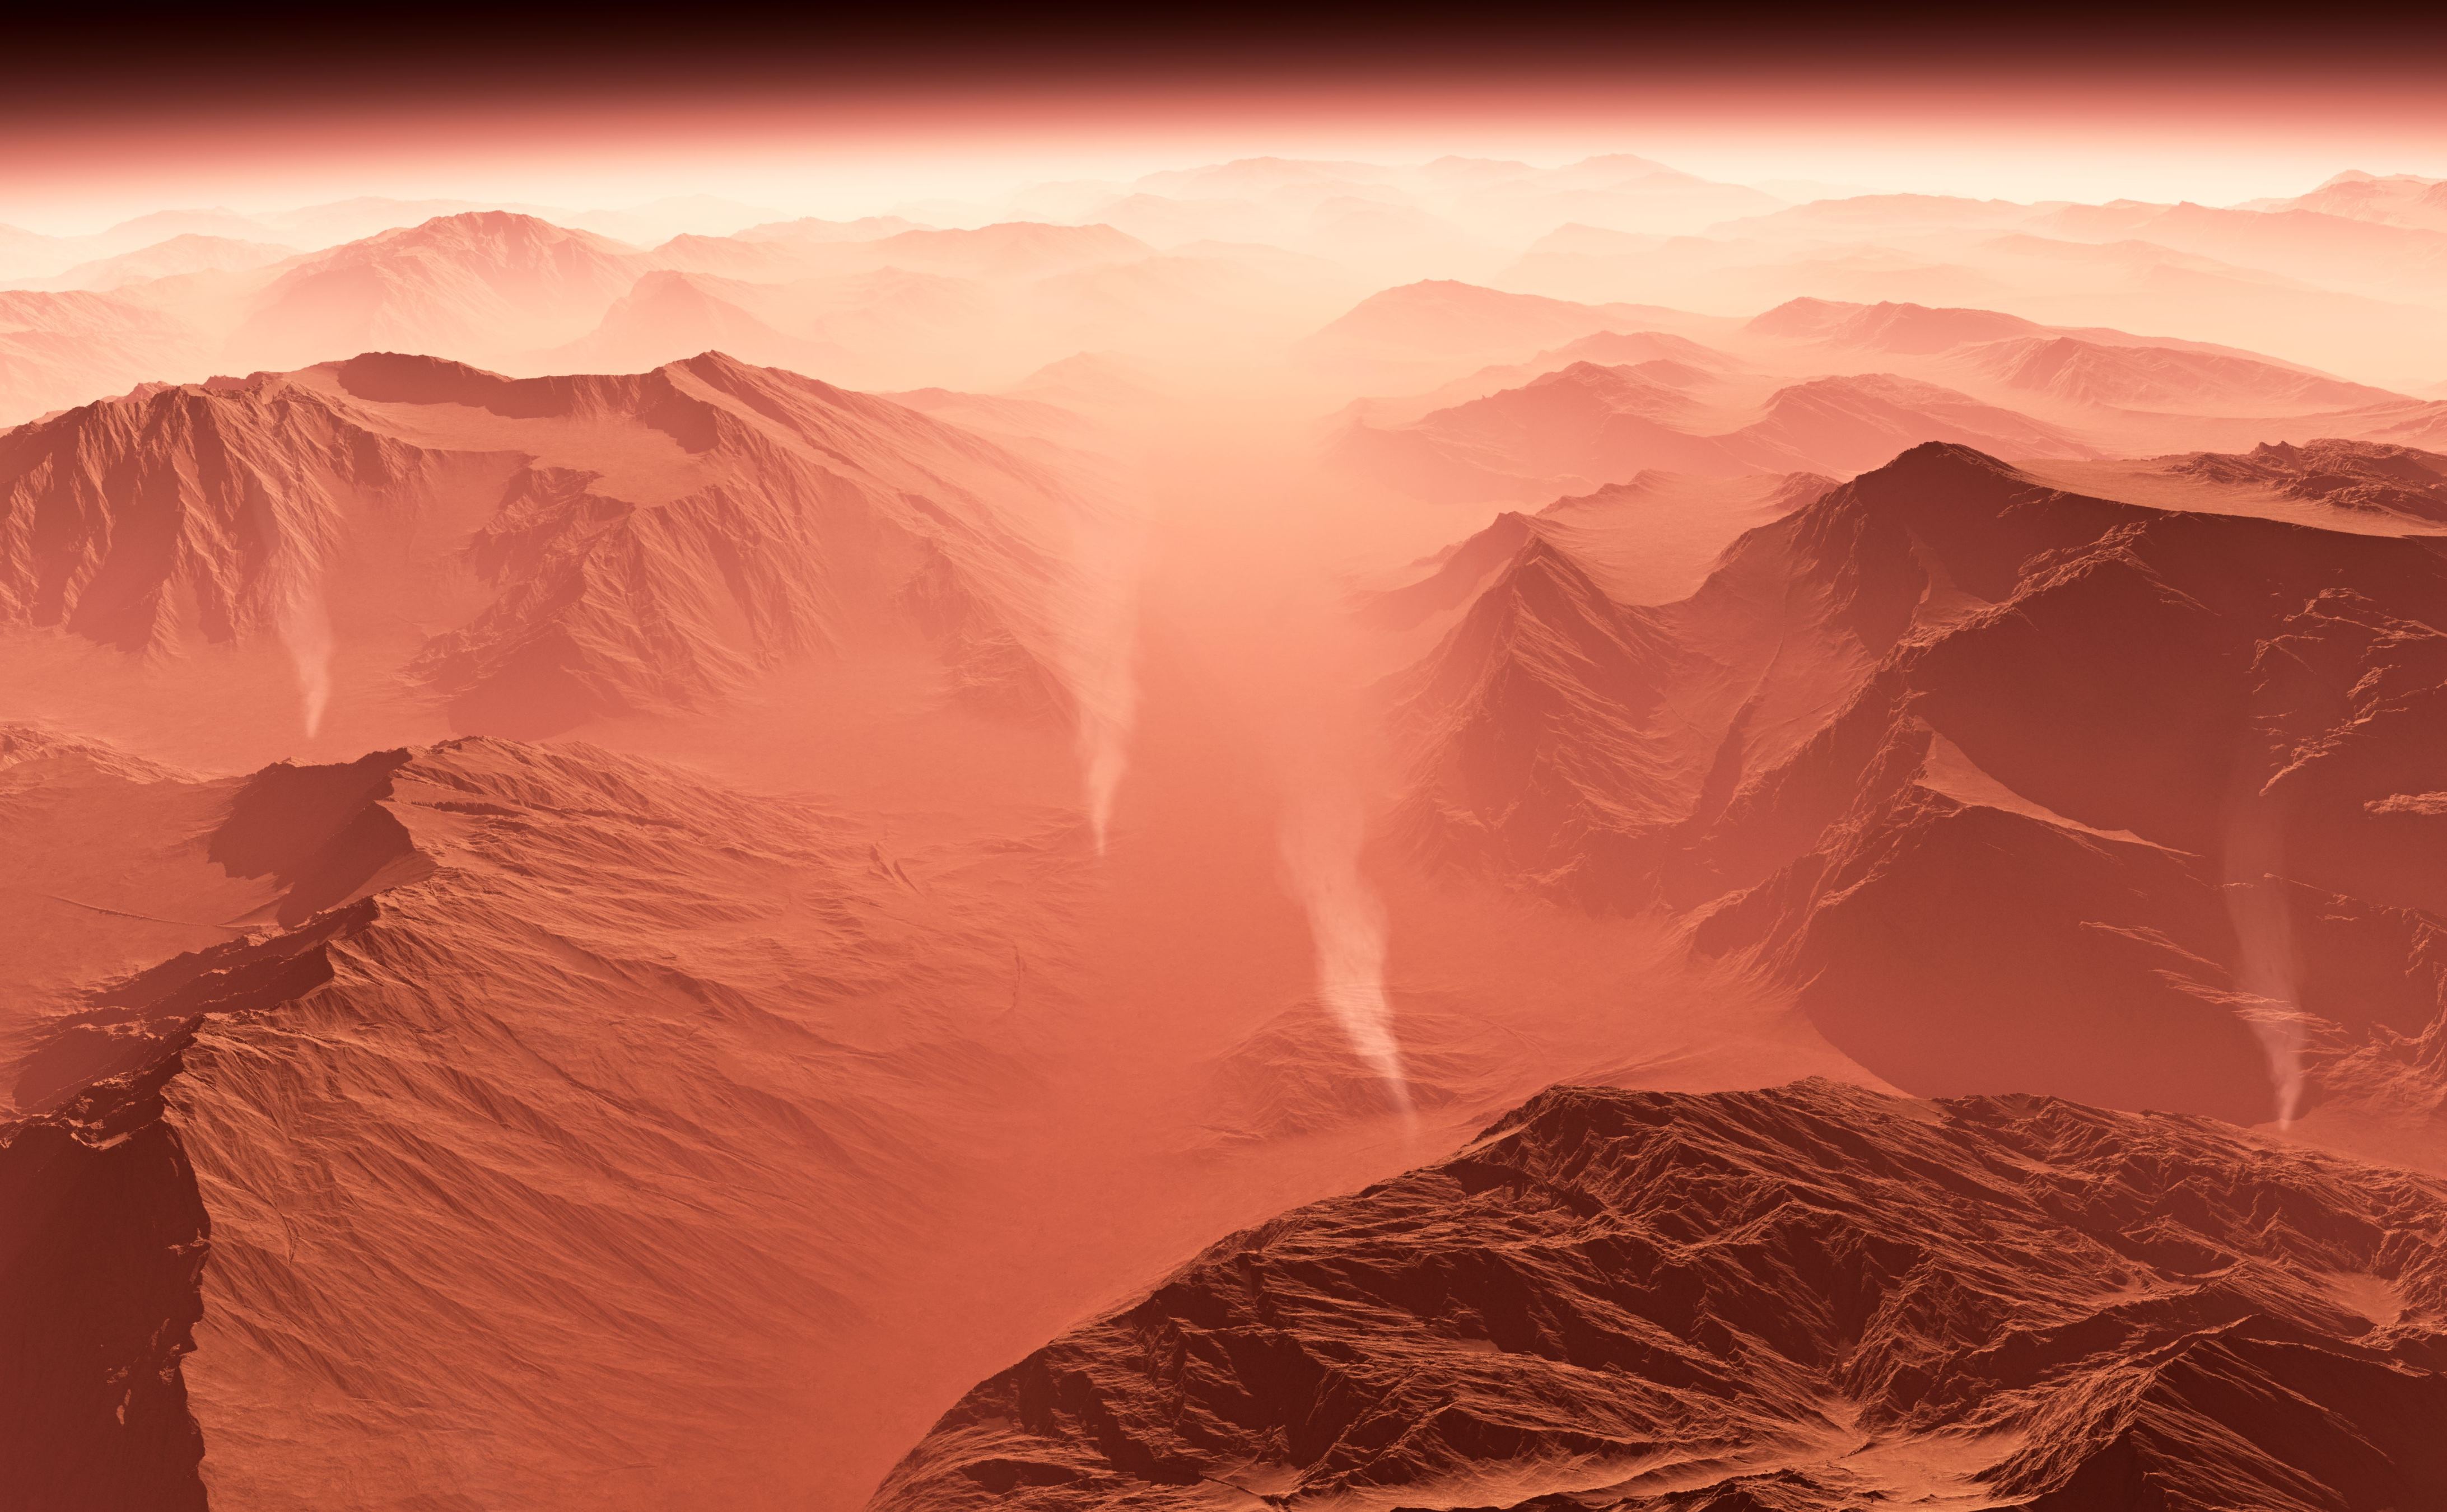 <p class="MsoNormal">If you like dust storms, go to Mars immediately! The planet has <a href="https://www.factslides.com/s-Solar-System">the biggest ones in the entire solar system</a>, they can last for months, and can cover the entire planet.</p>